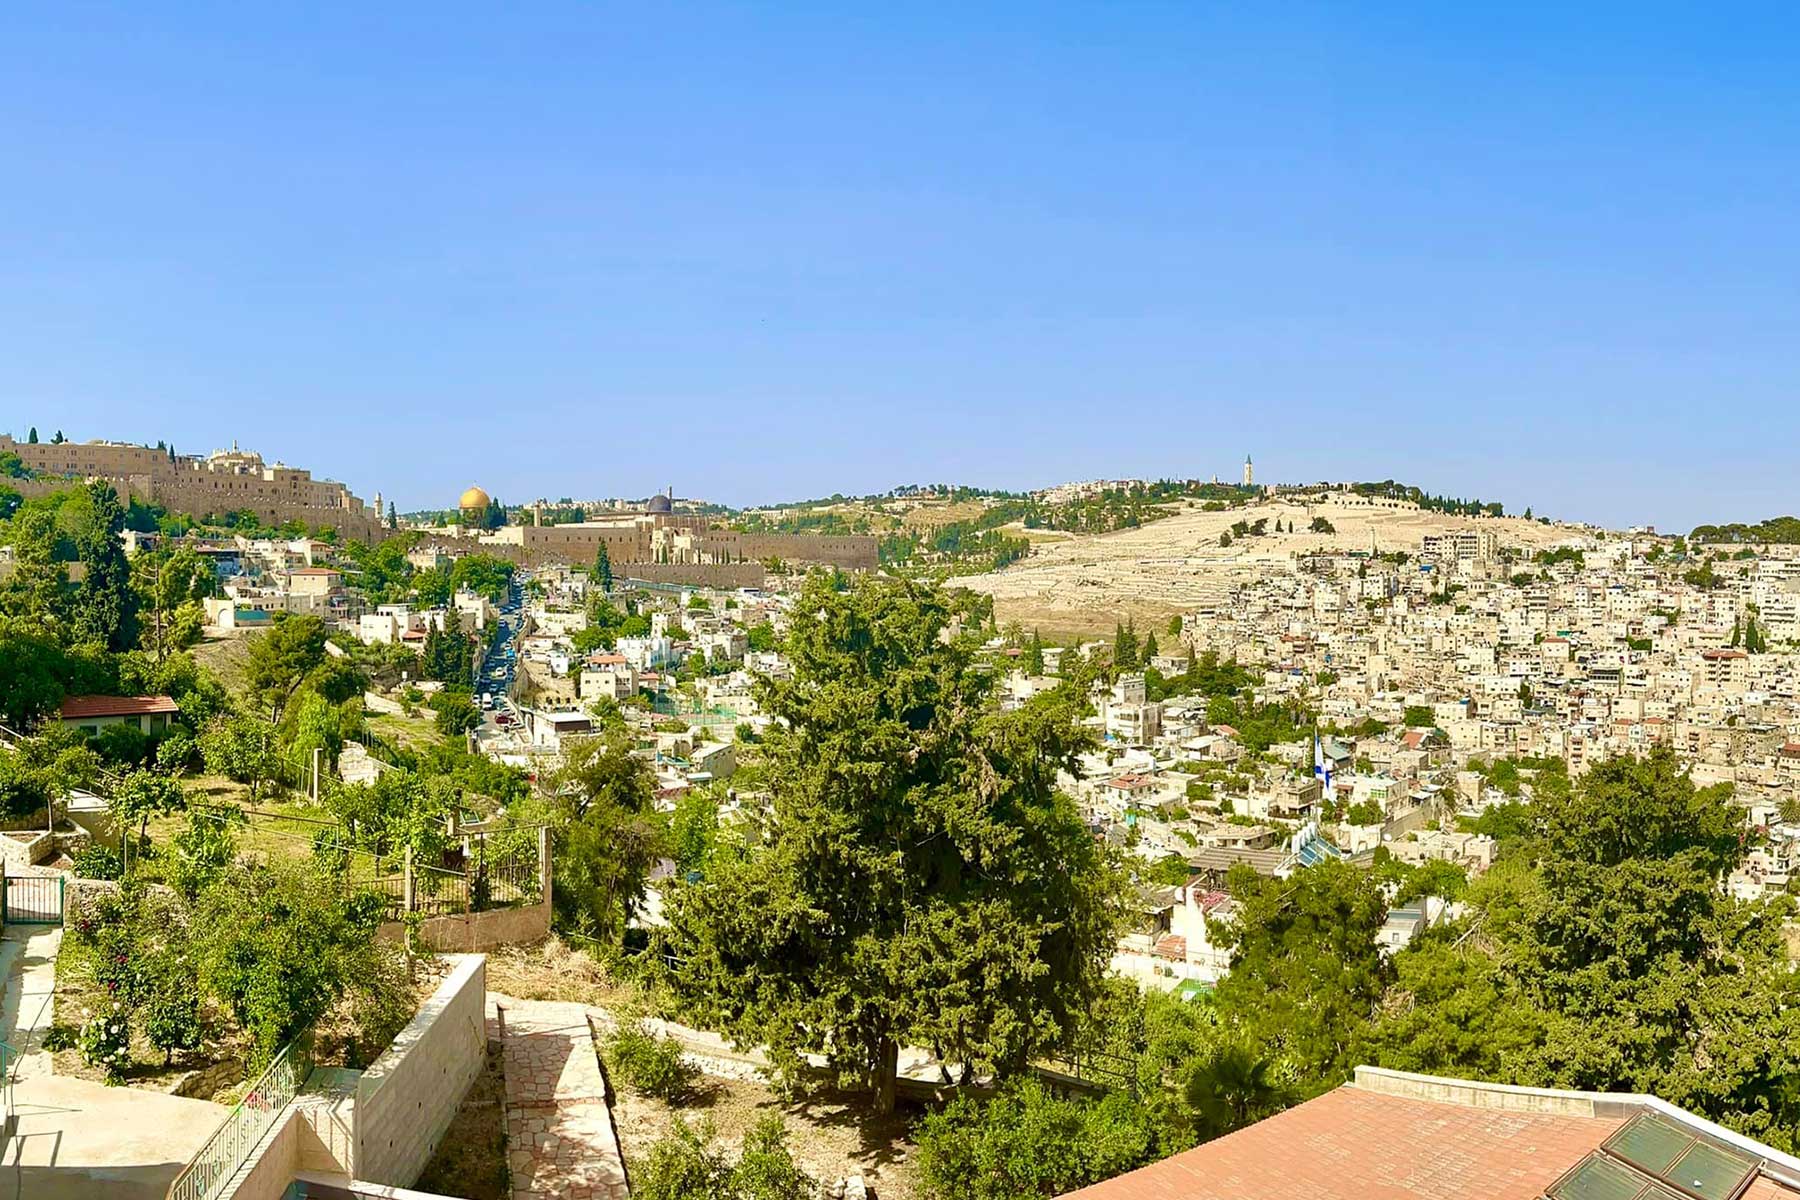 View of Jerusalem taken from atop a mountain